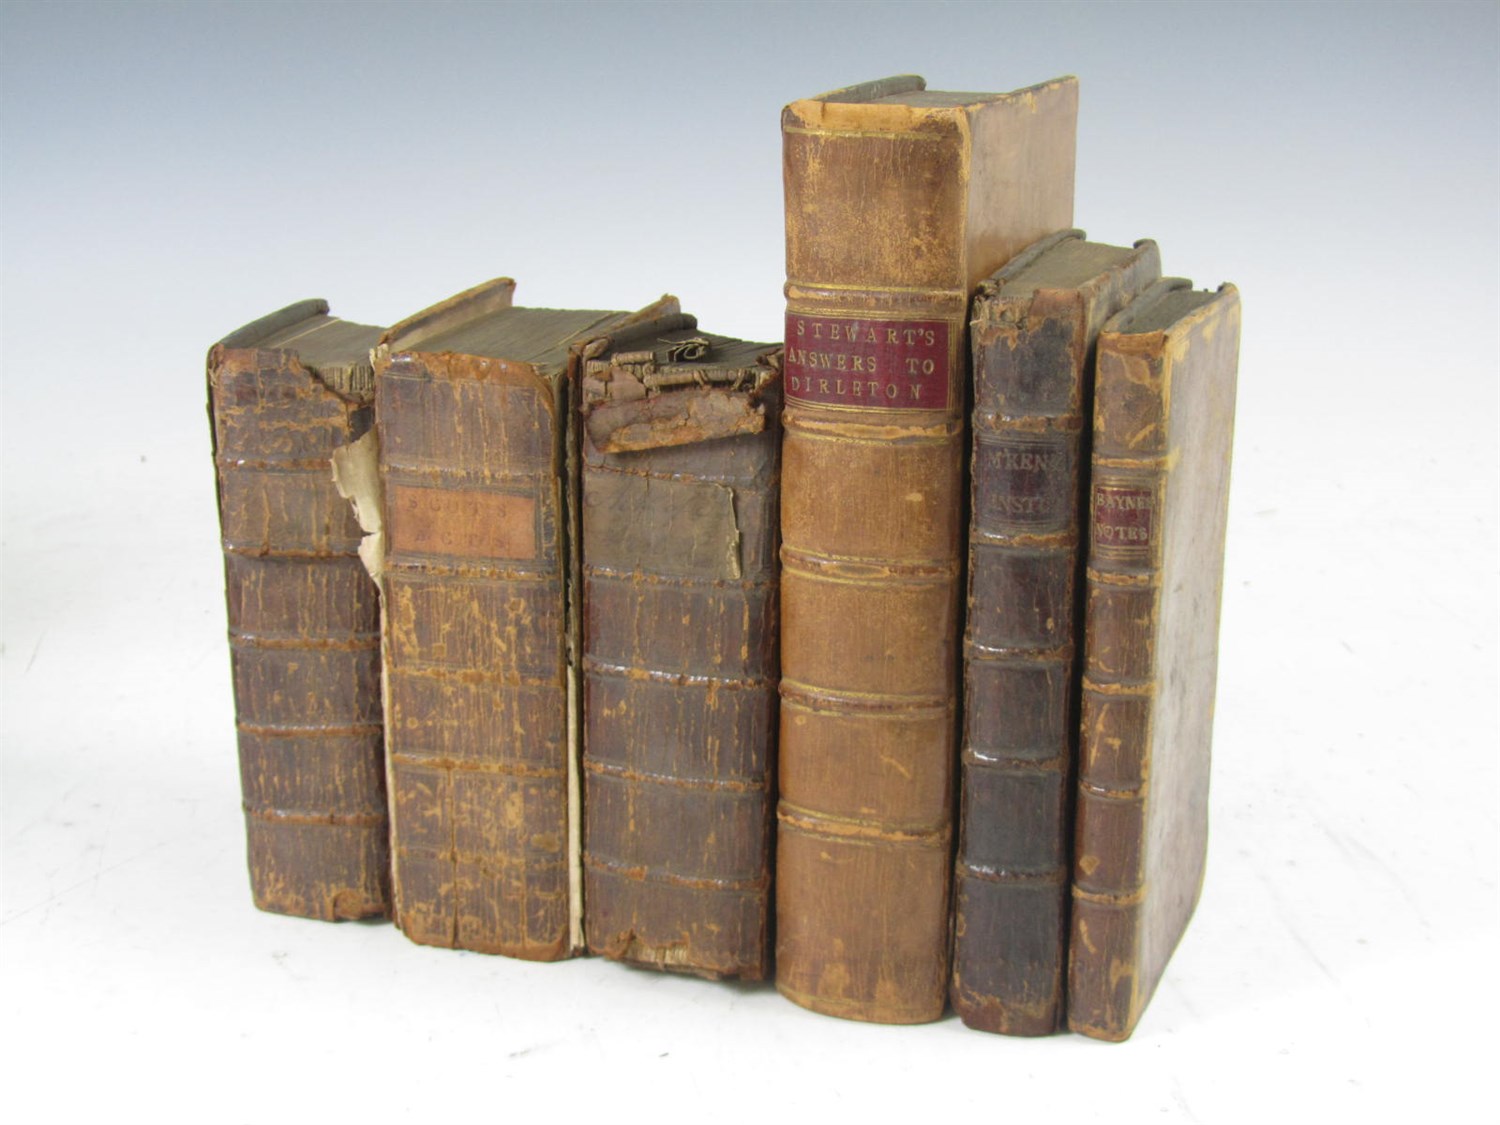 Lot 21 - 6 legal works - 16th and 17th century